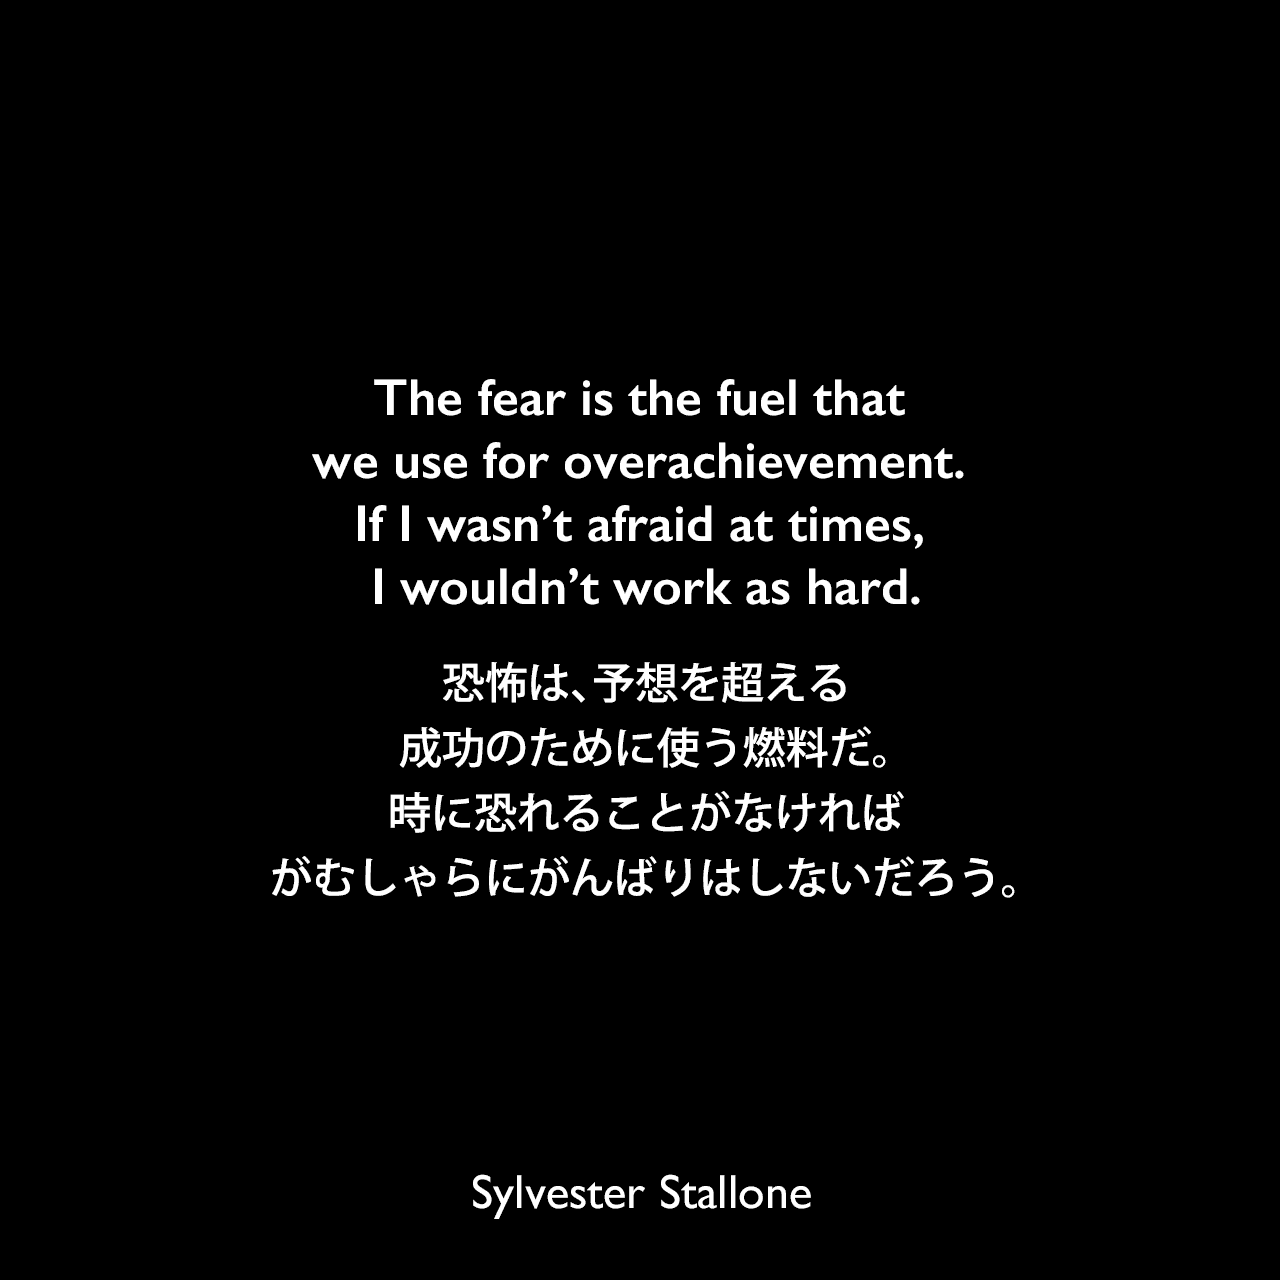 The fear is the fuel that we use for overachievement. If I wasn’t afraid at times, I wouldn’t work as hard.恐怖は、予想を超える成功のために使う燃料だ。時に恐れることがなければ、がむしゃらにがんばりはしないだろう。Sylvester Stallone